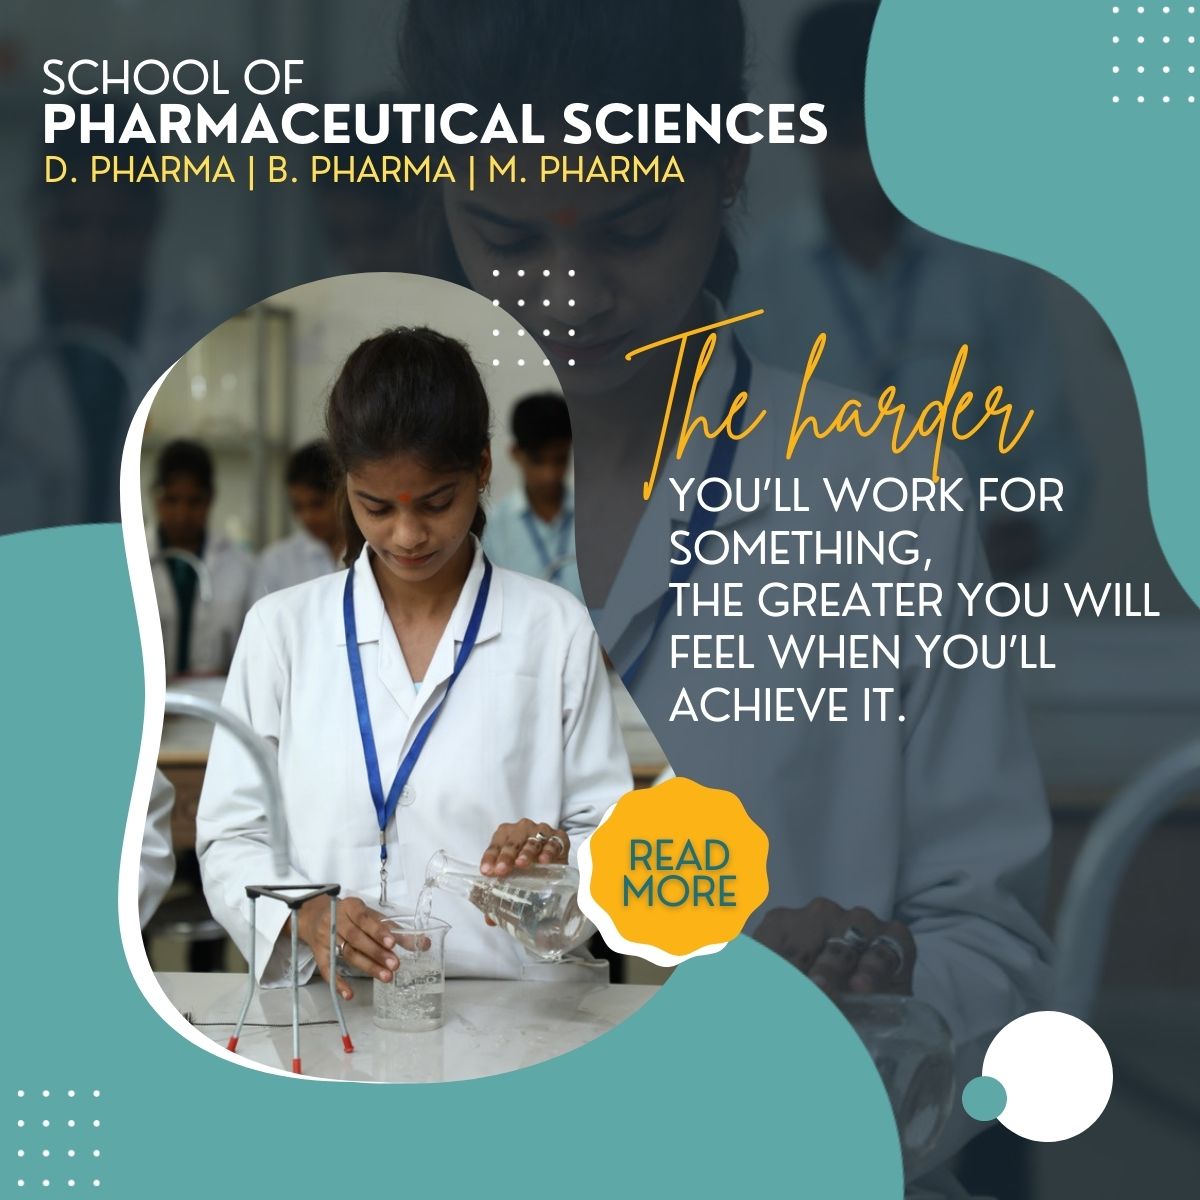 Best/Top B.Pharma/D.Pharma & Pharmacy Colleges in UP, Lucknow, Delhi NCR, India